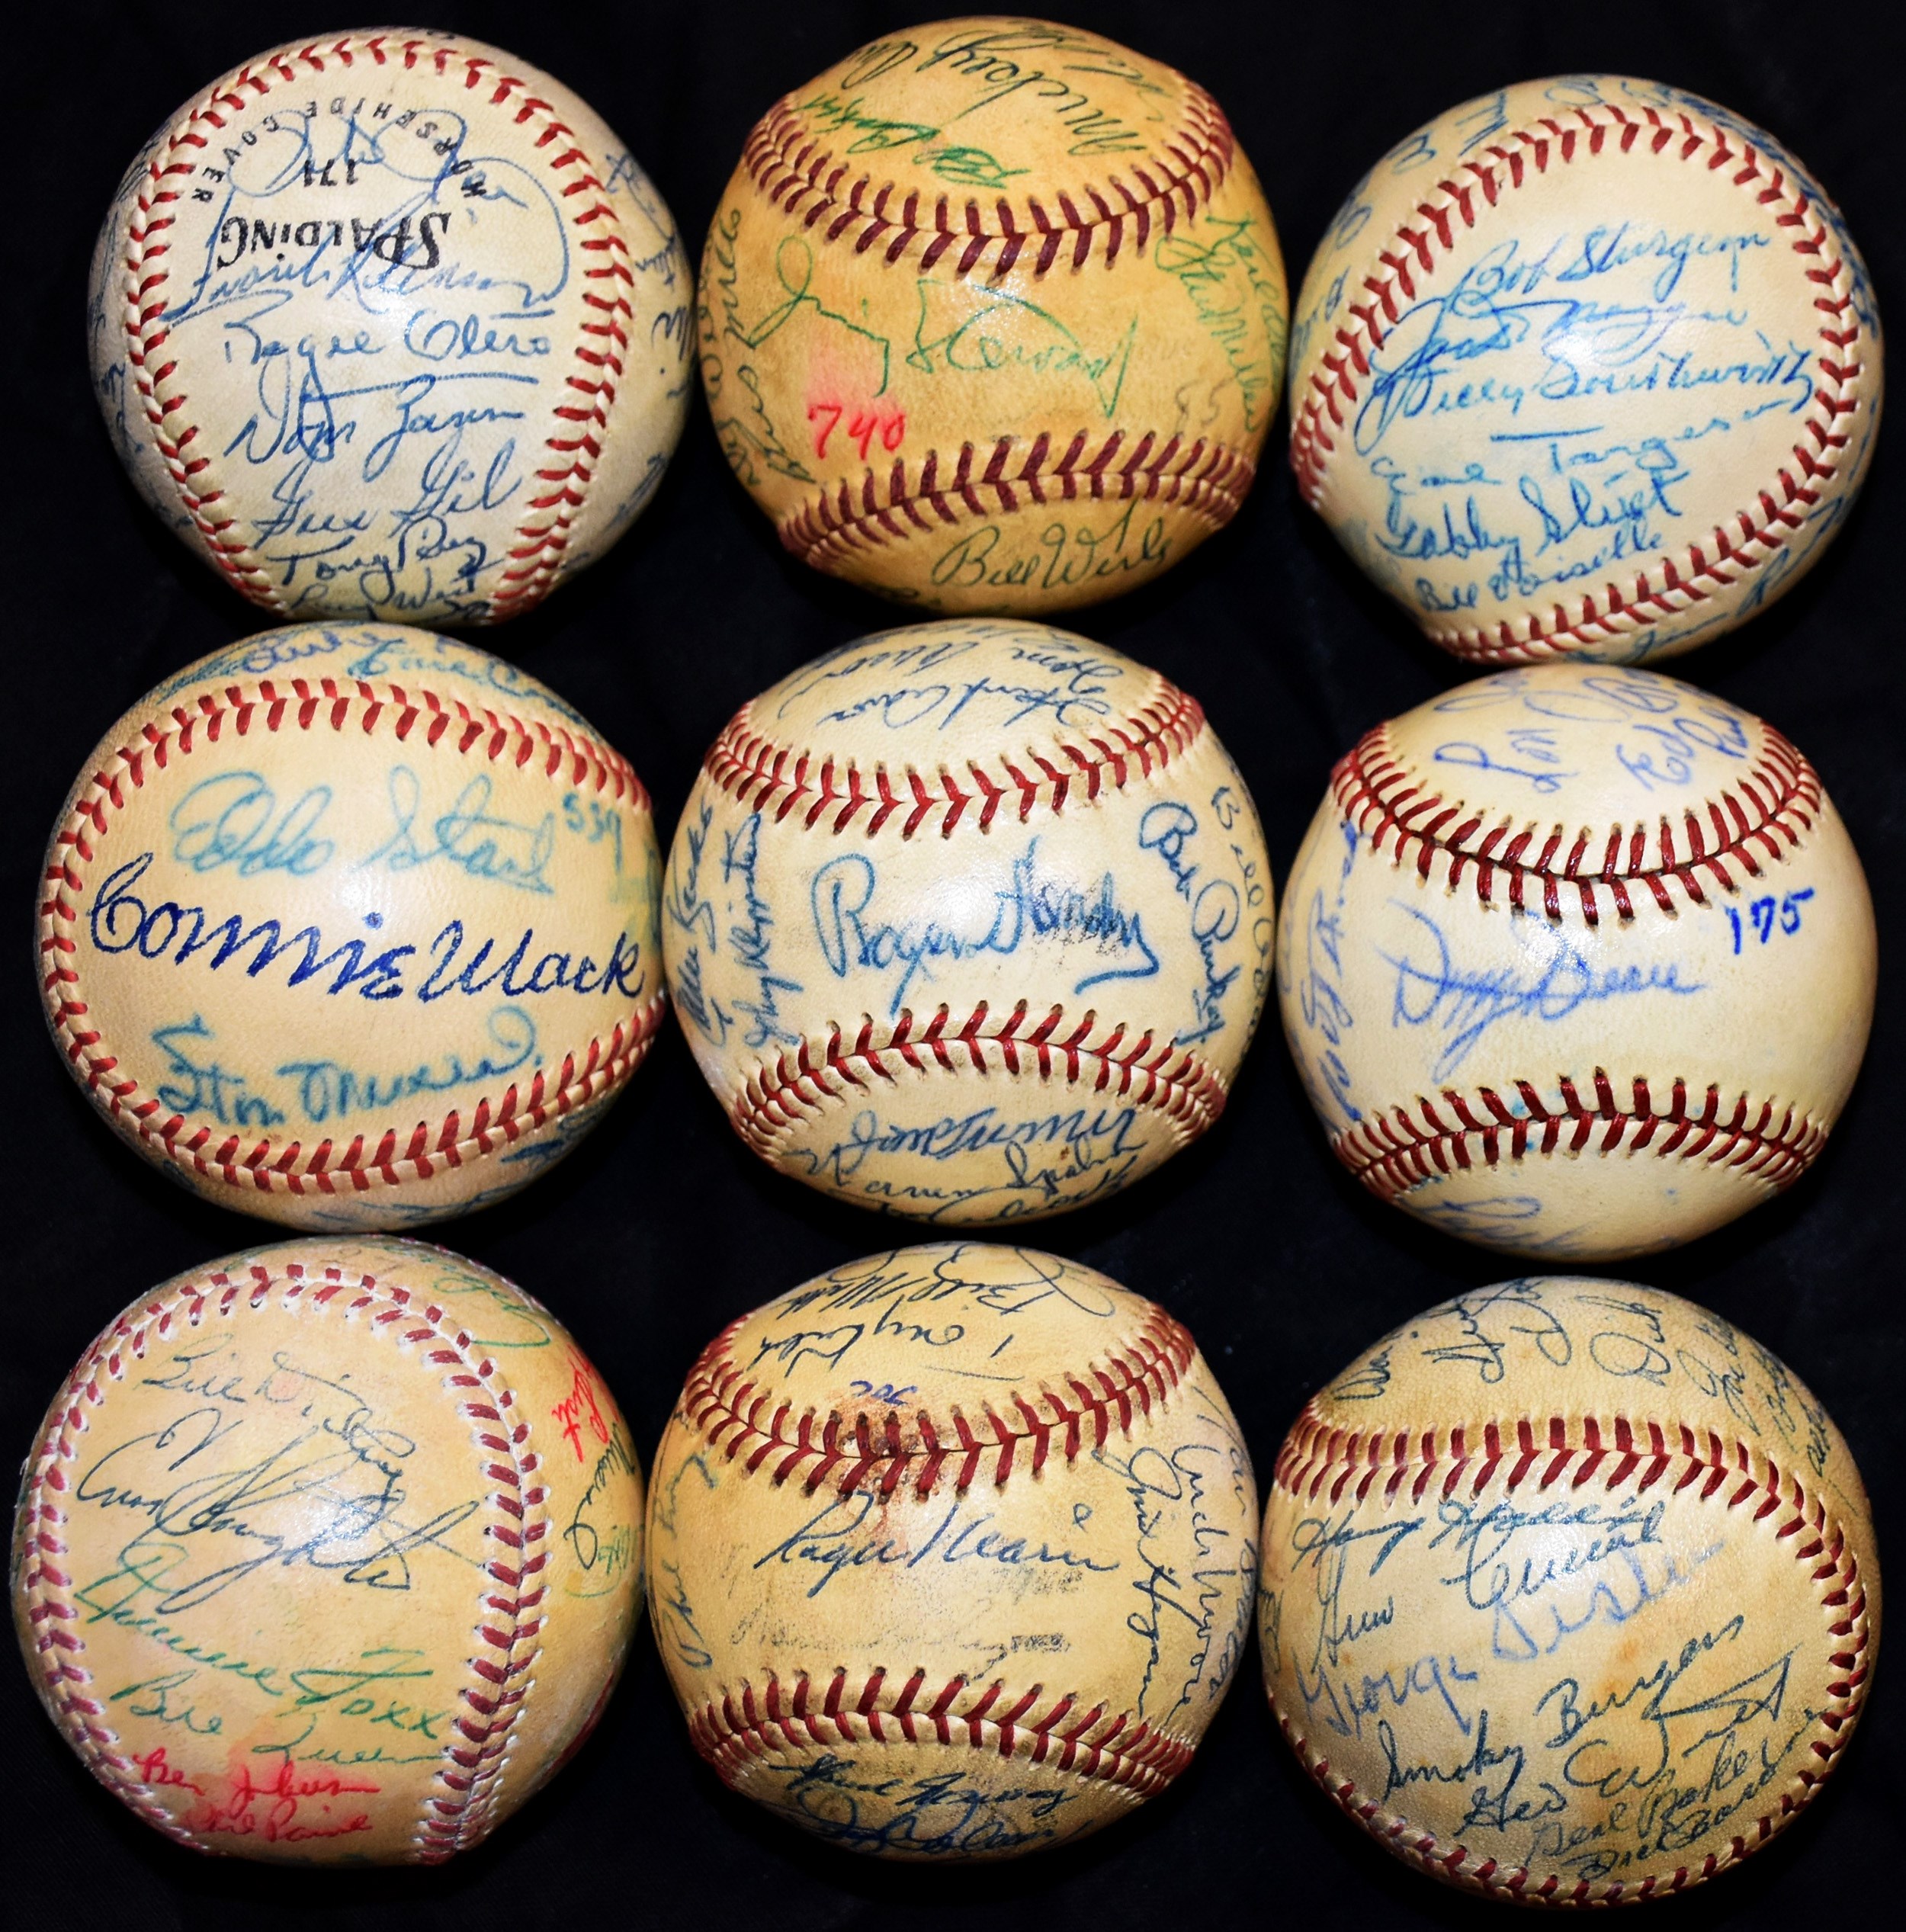 The John O'connor Signed Baseball Collection - Treasure Trove of Vintage Team-Signed Baseballs with MAJOR Names Inc: Foxx & Hornsby (225+)